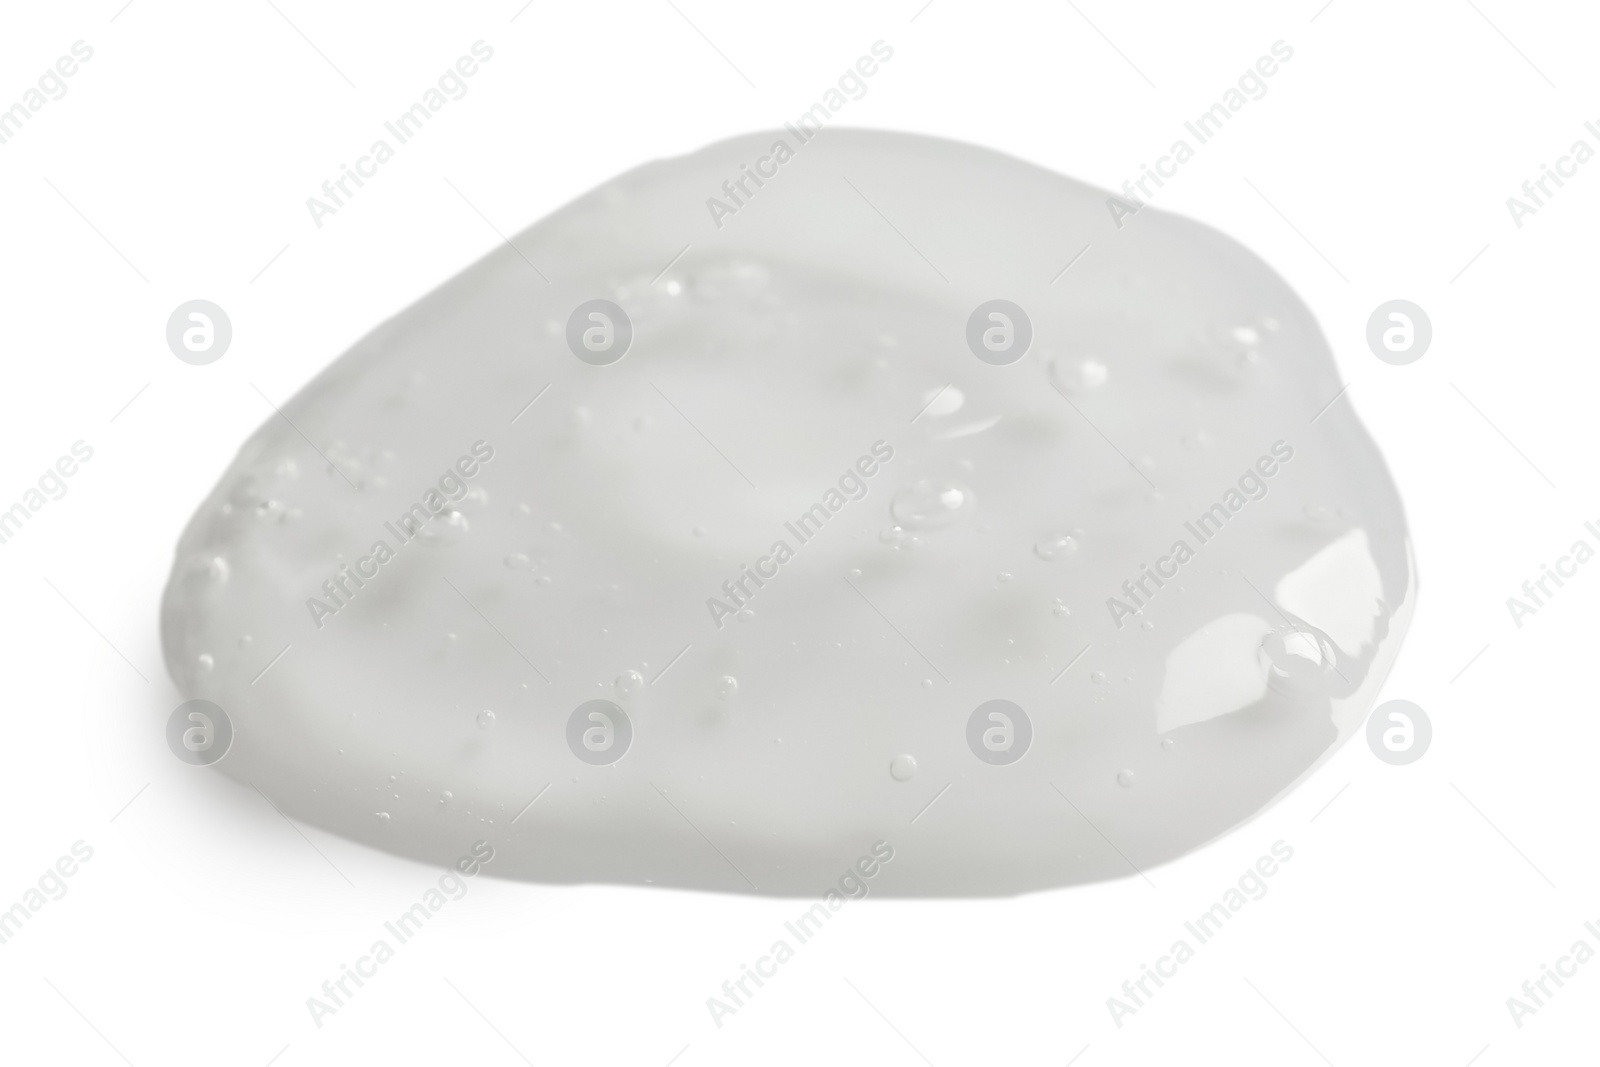 Photo of Sample of transparent cosmetic gel isolated on white